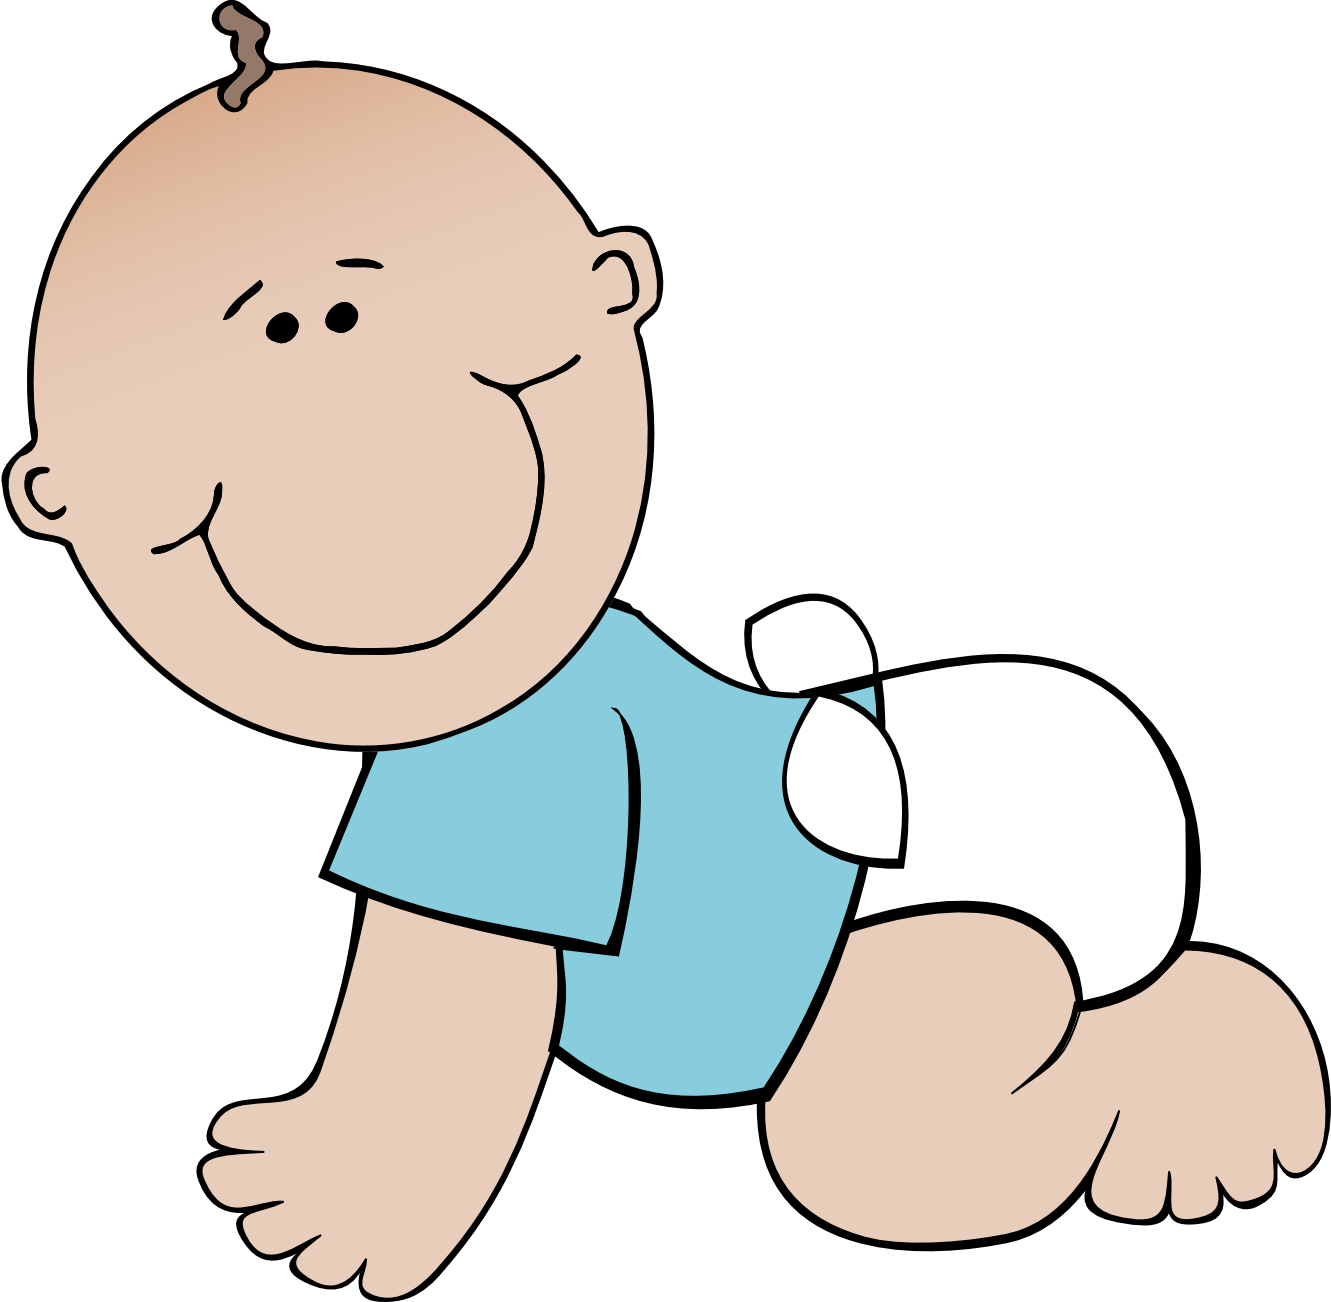 Free baby clip art border free clipart images